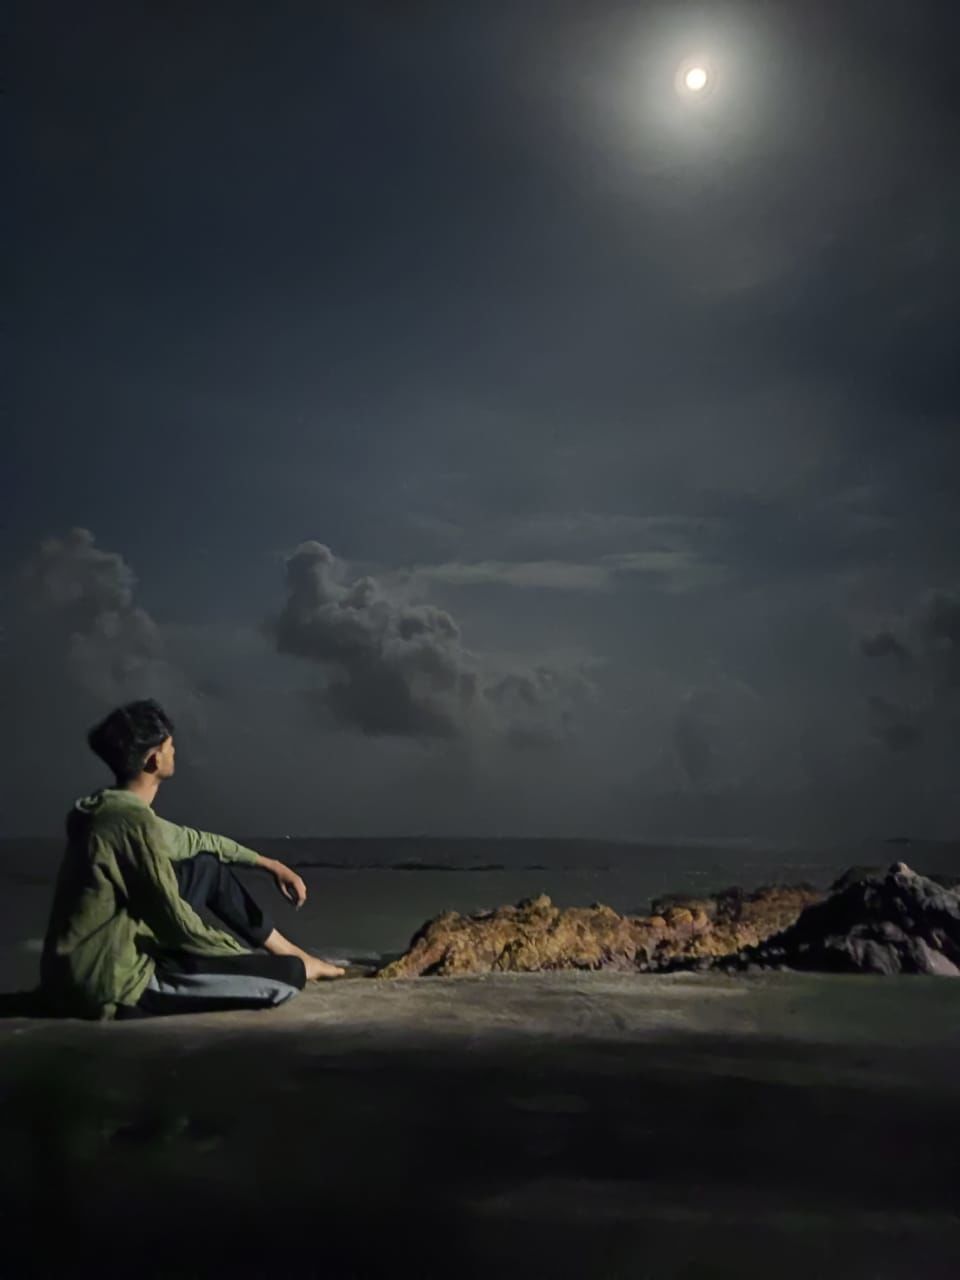 moon, sky, night, one person, darkness, full moon, cloud, moonlight, light, nature, sitting, water, horizon, beach, sea, adult, beauty in nature, land, men, morning, side view, tranquility, young adult, person, scenics - nature, ocean, outdoors, looking, full length, leisure activity, relaxation, copy space, solitude